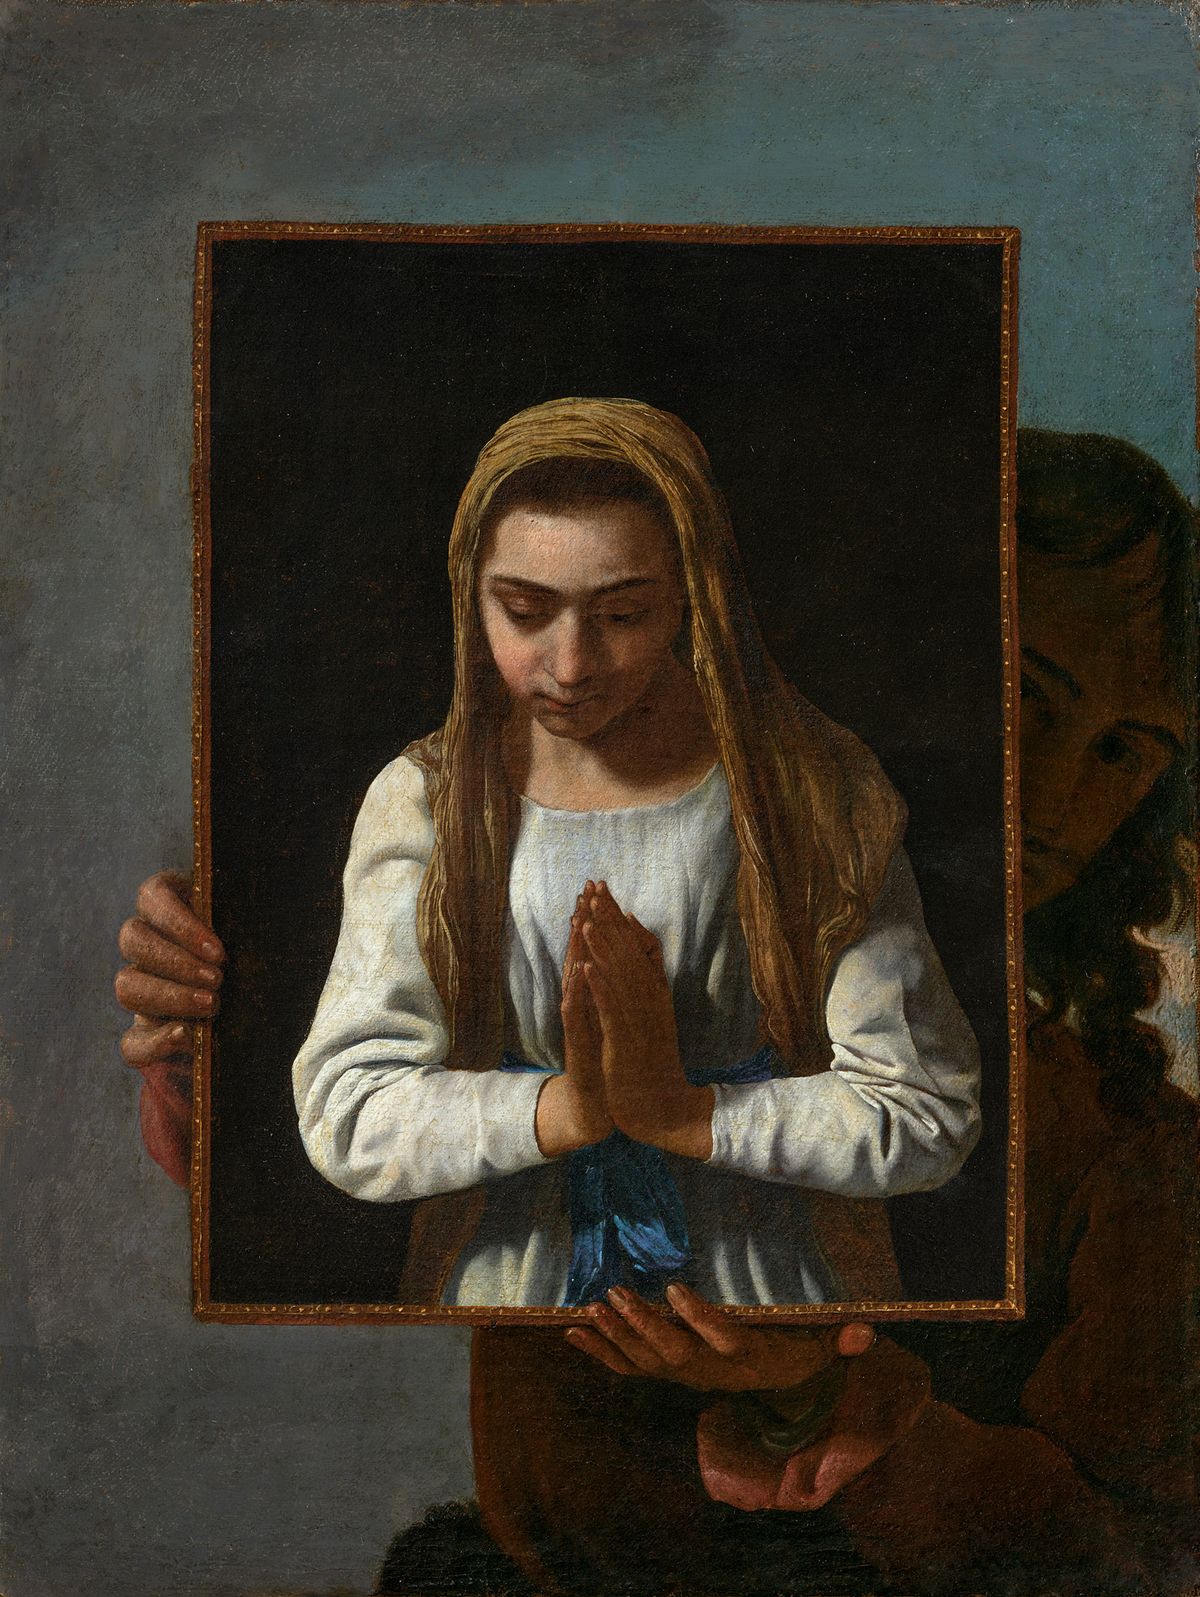 Michael Sweerts, A portrait of the artist (?), presenting the Virgin in Prayer (around 1656-58) Courtesy Christie’s